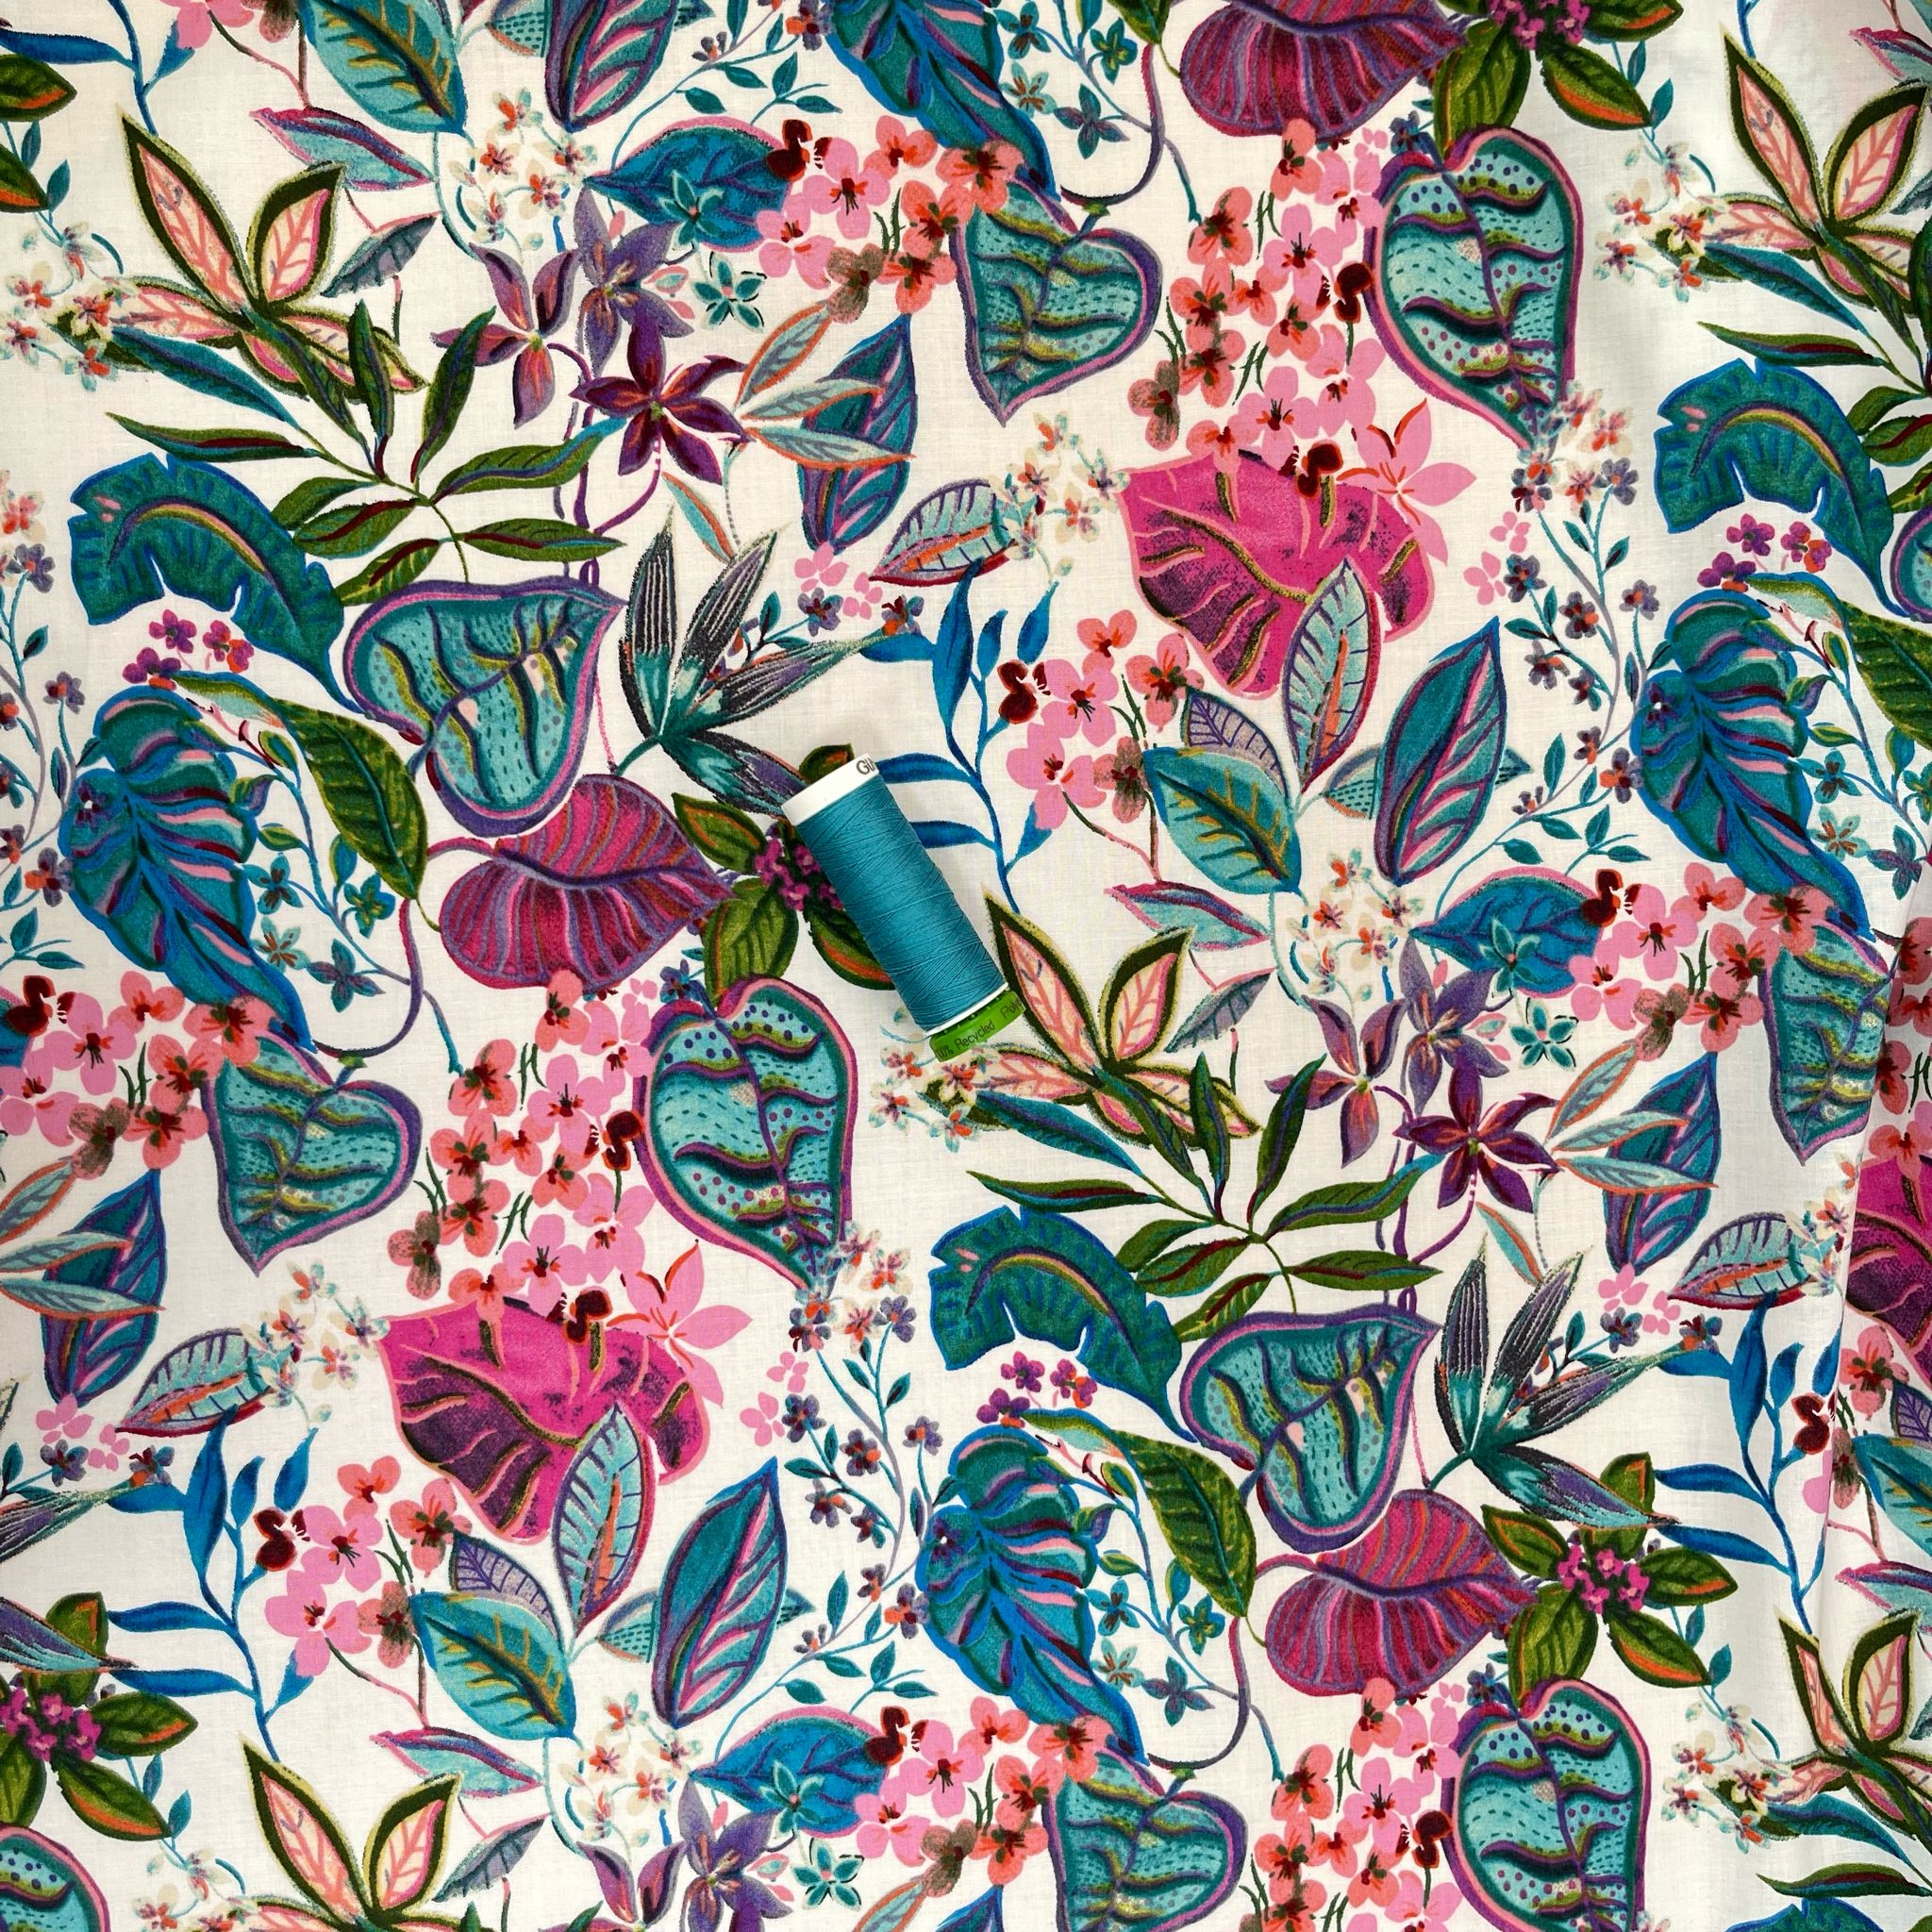 Tropical Foliage in Teal and Pink Cotton Lawn Fabric